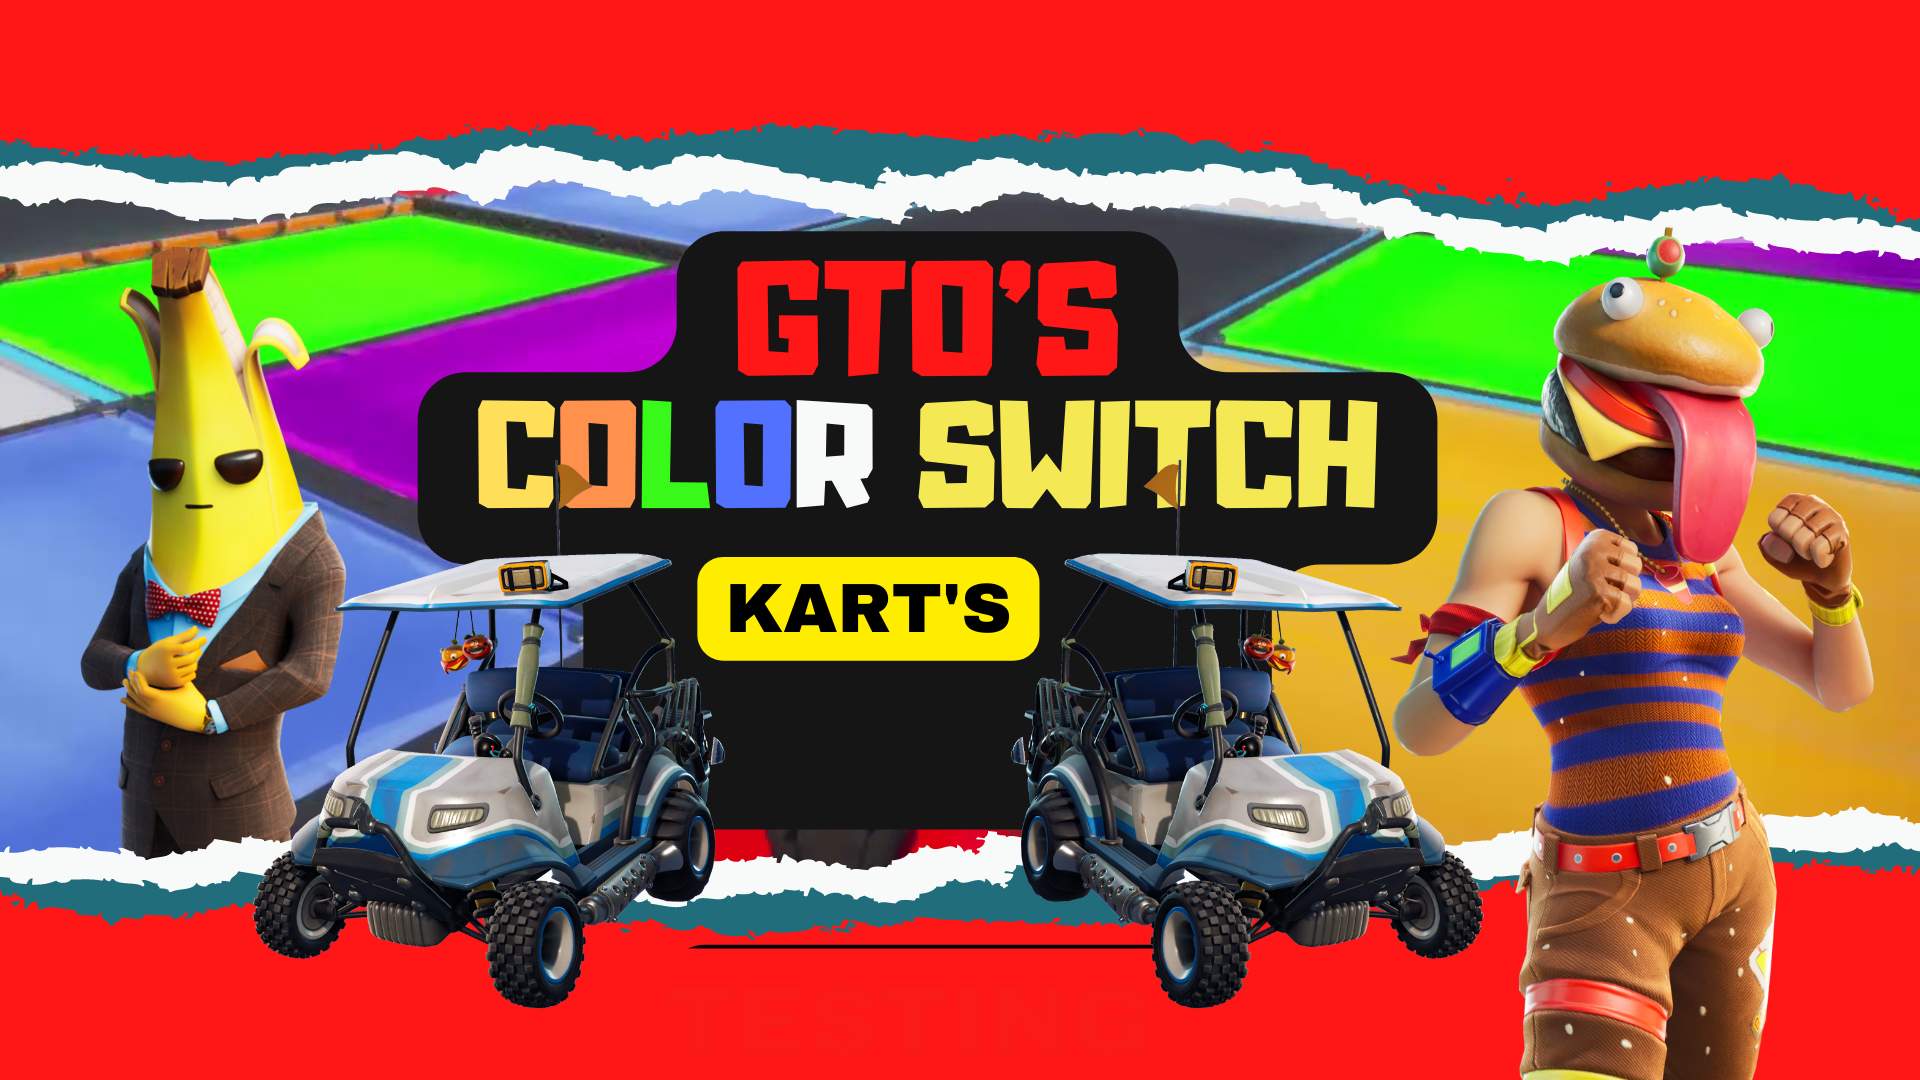 GTO'S COLOR SWITCH (ATK'S)